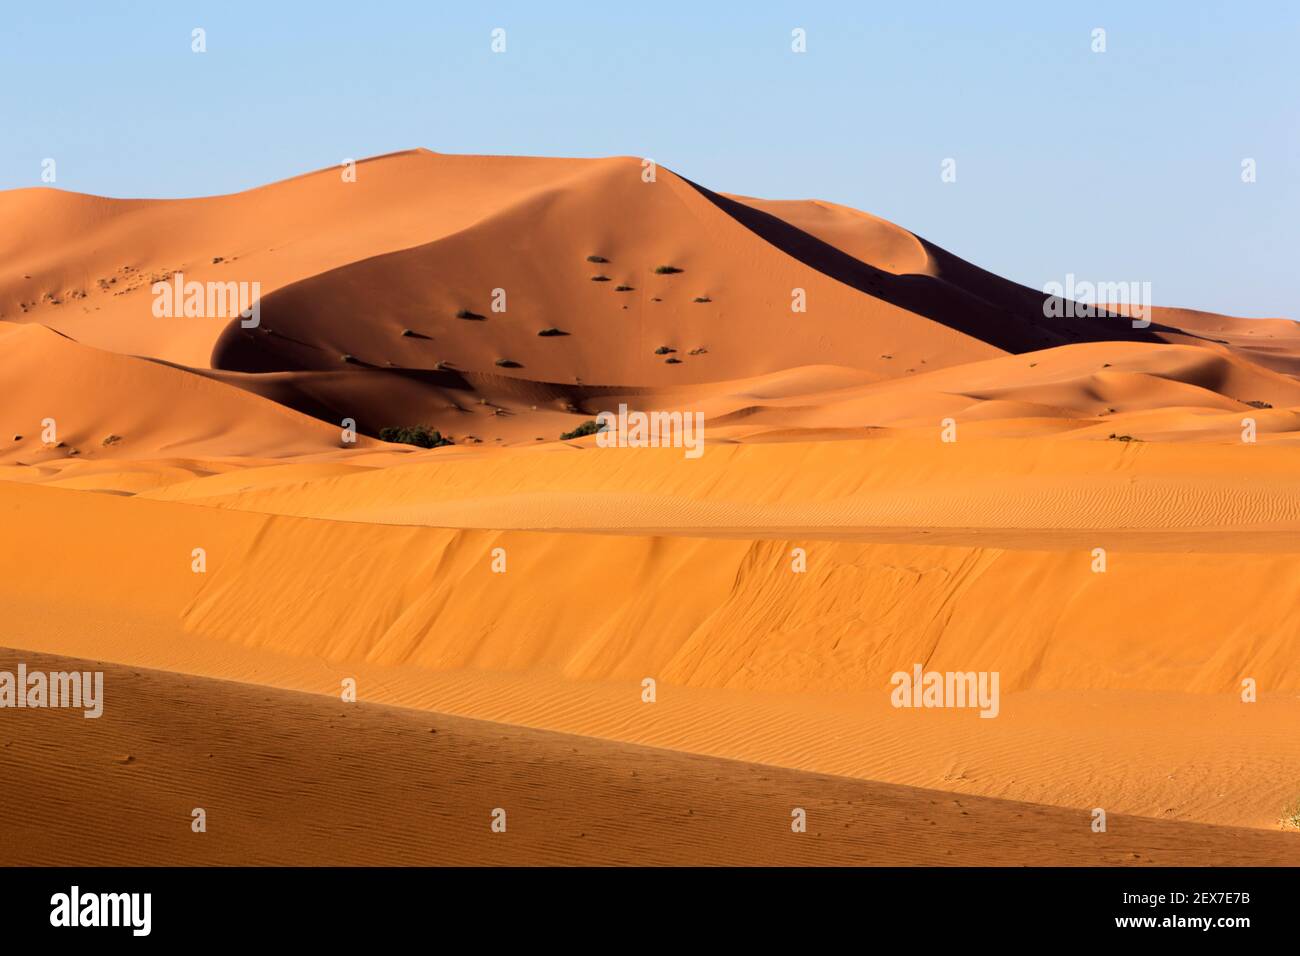 Morocco, Merzouga, the Erg Chebbi Dunes  at sunrise, the desert dunes extend 30km and reach heights of 250 meters Stock Photo